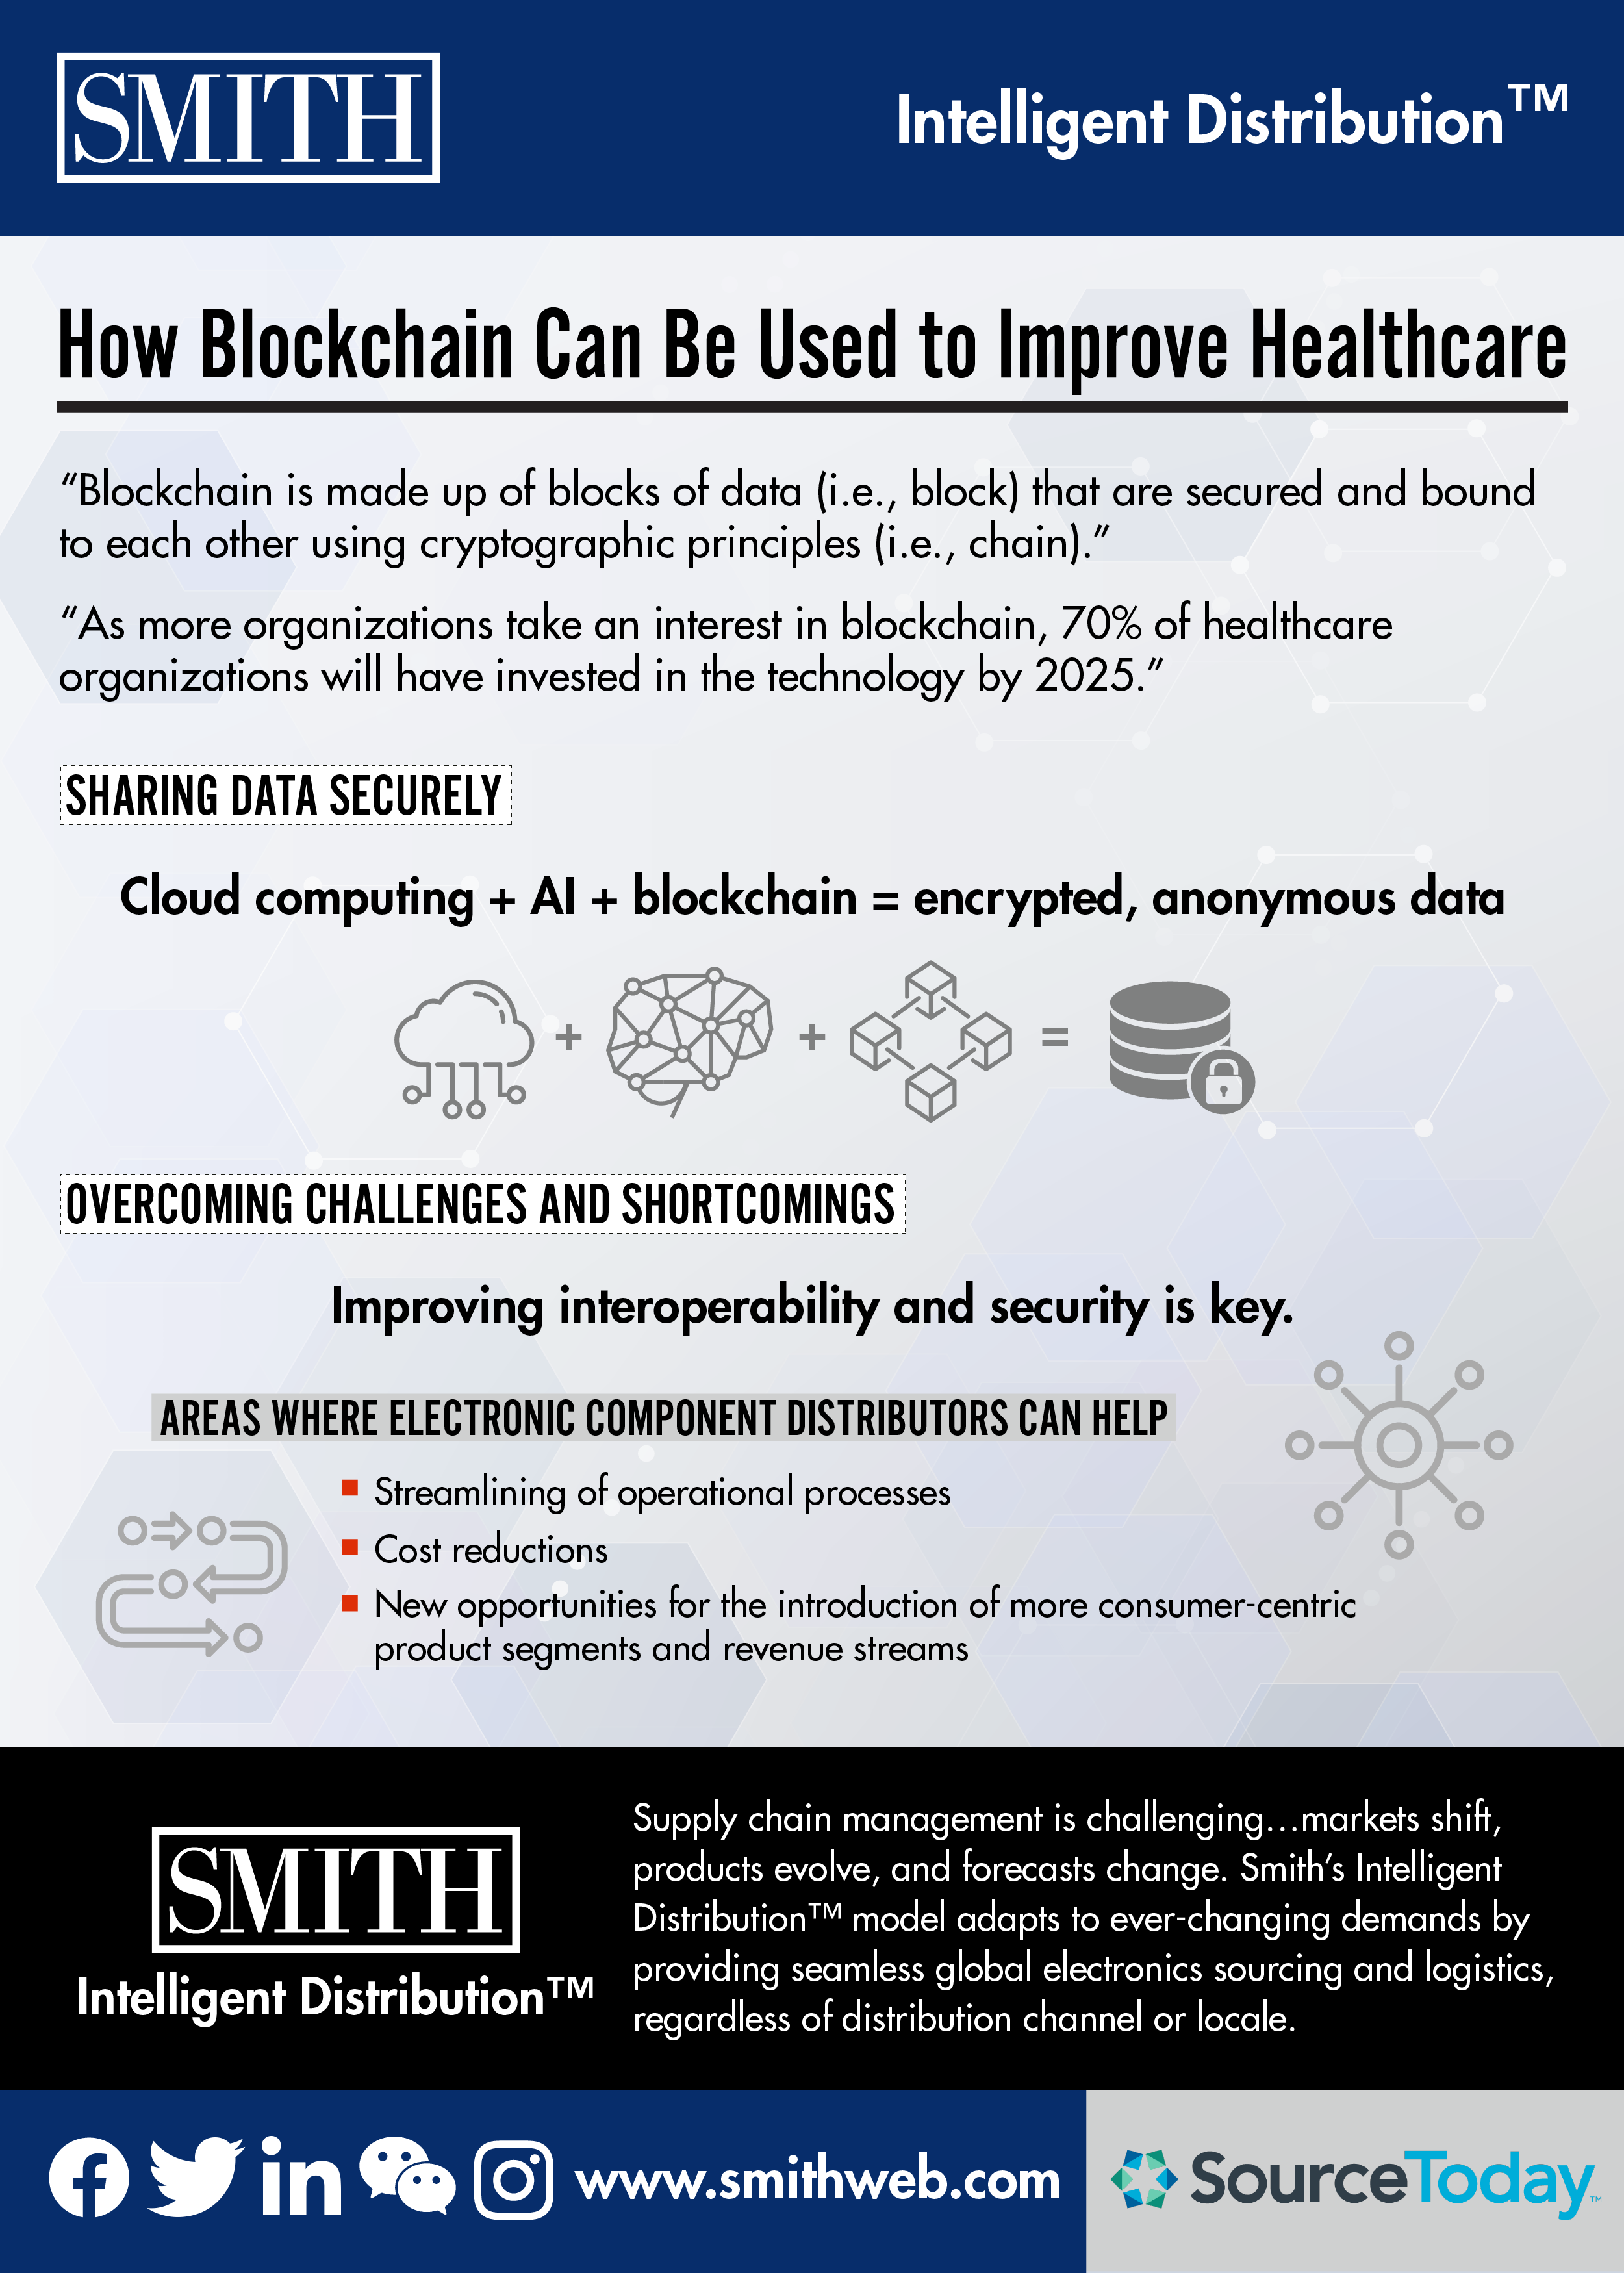 Smith How Blockchain Can Be Used to Improve Healthcare 9.13.2019 01